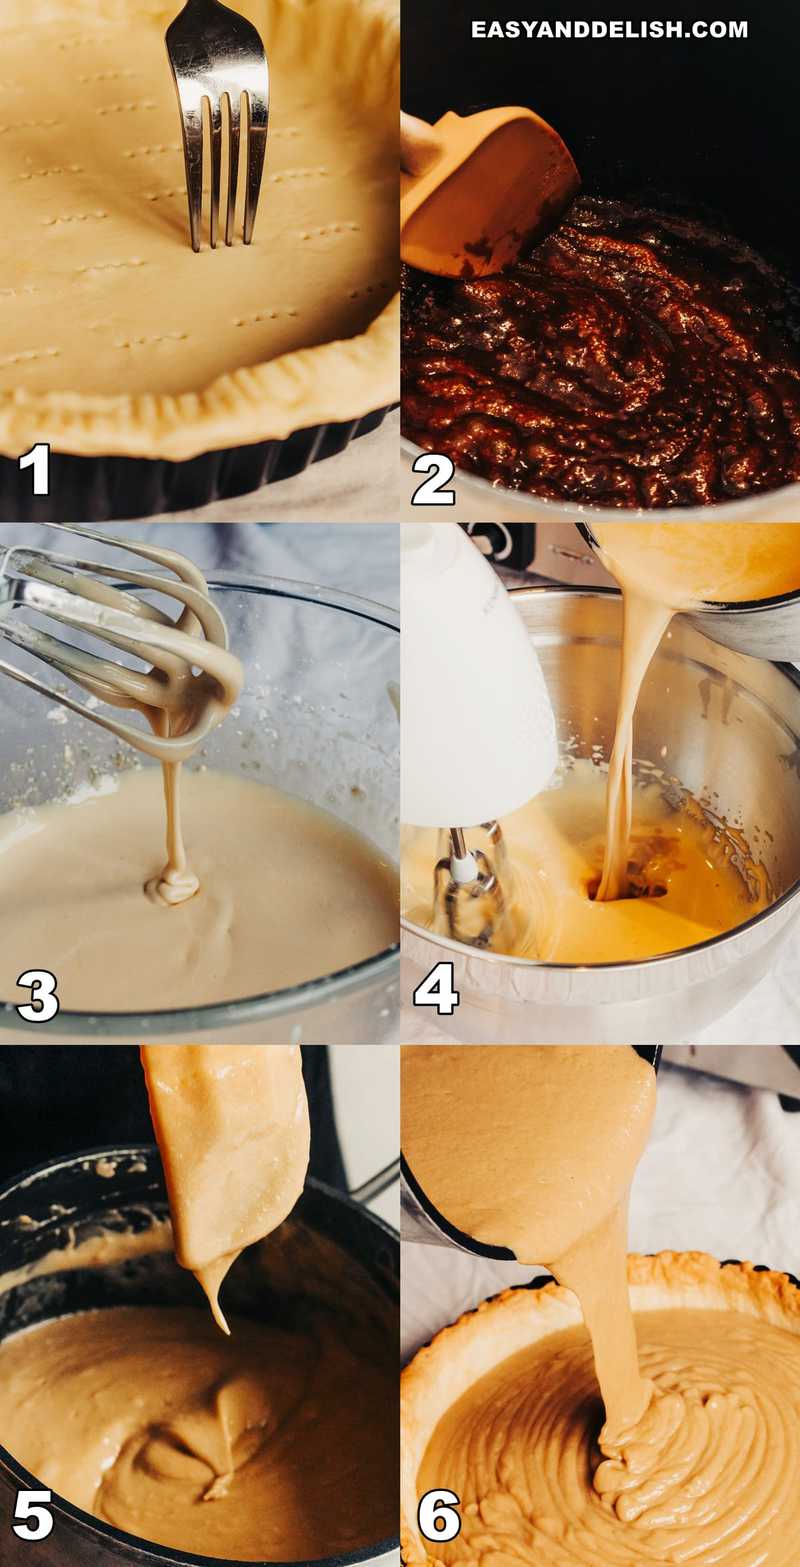 steps showing how to make butterscotch pie from scratch